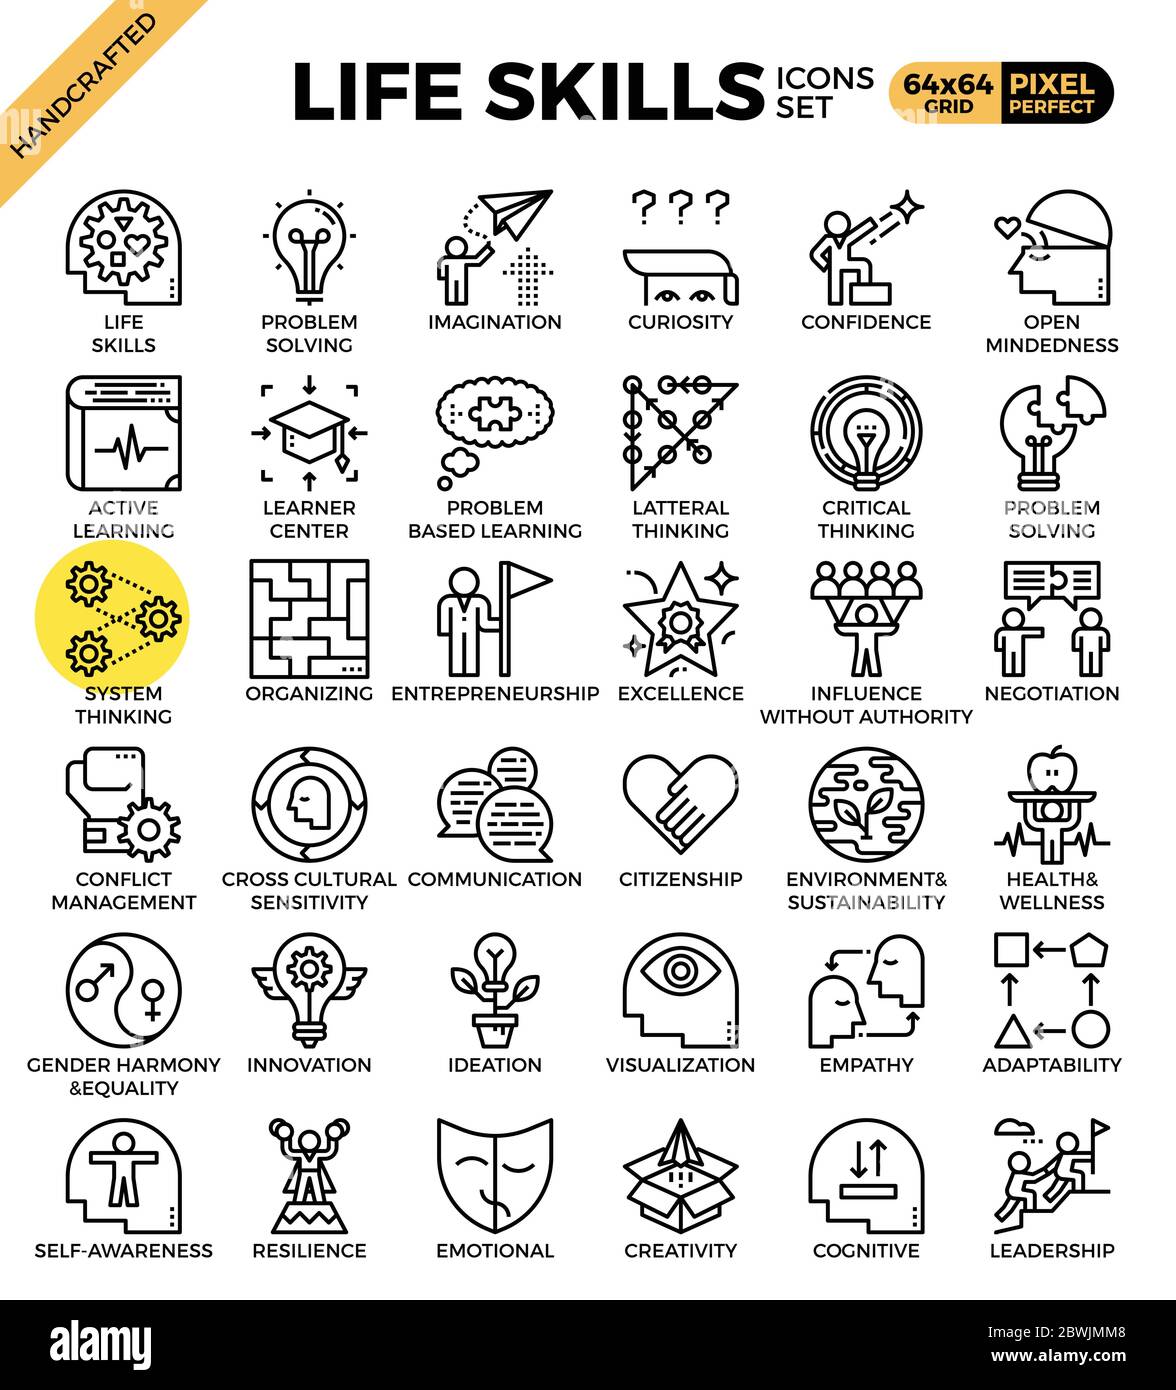 Life skills concept icons set in modern line icon style for ui, ux, website, web, app graphic design Stock Vector